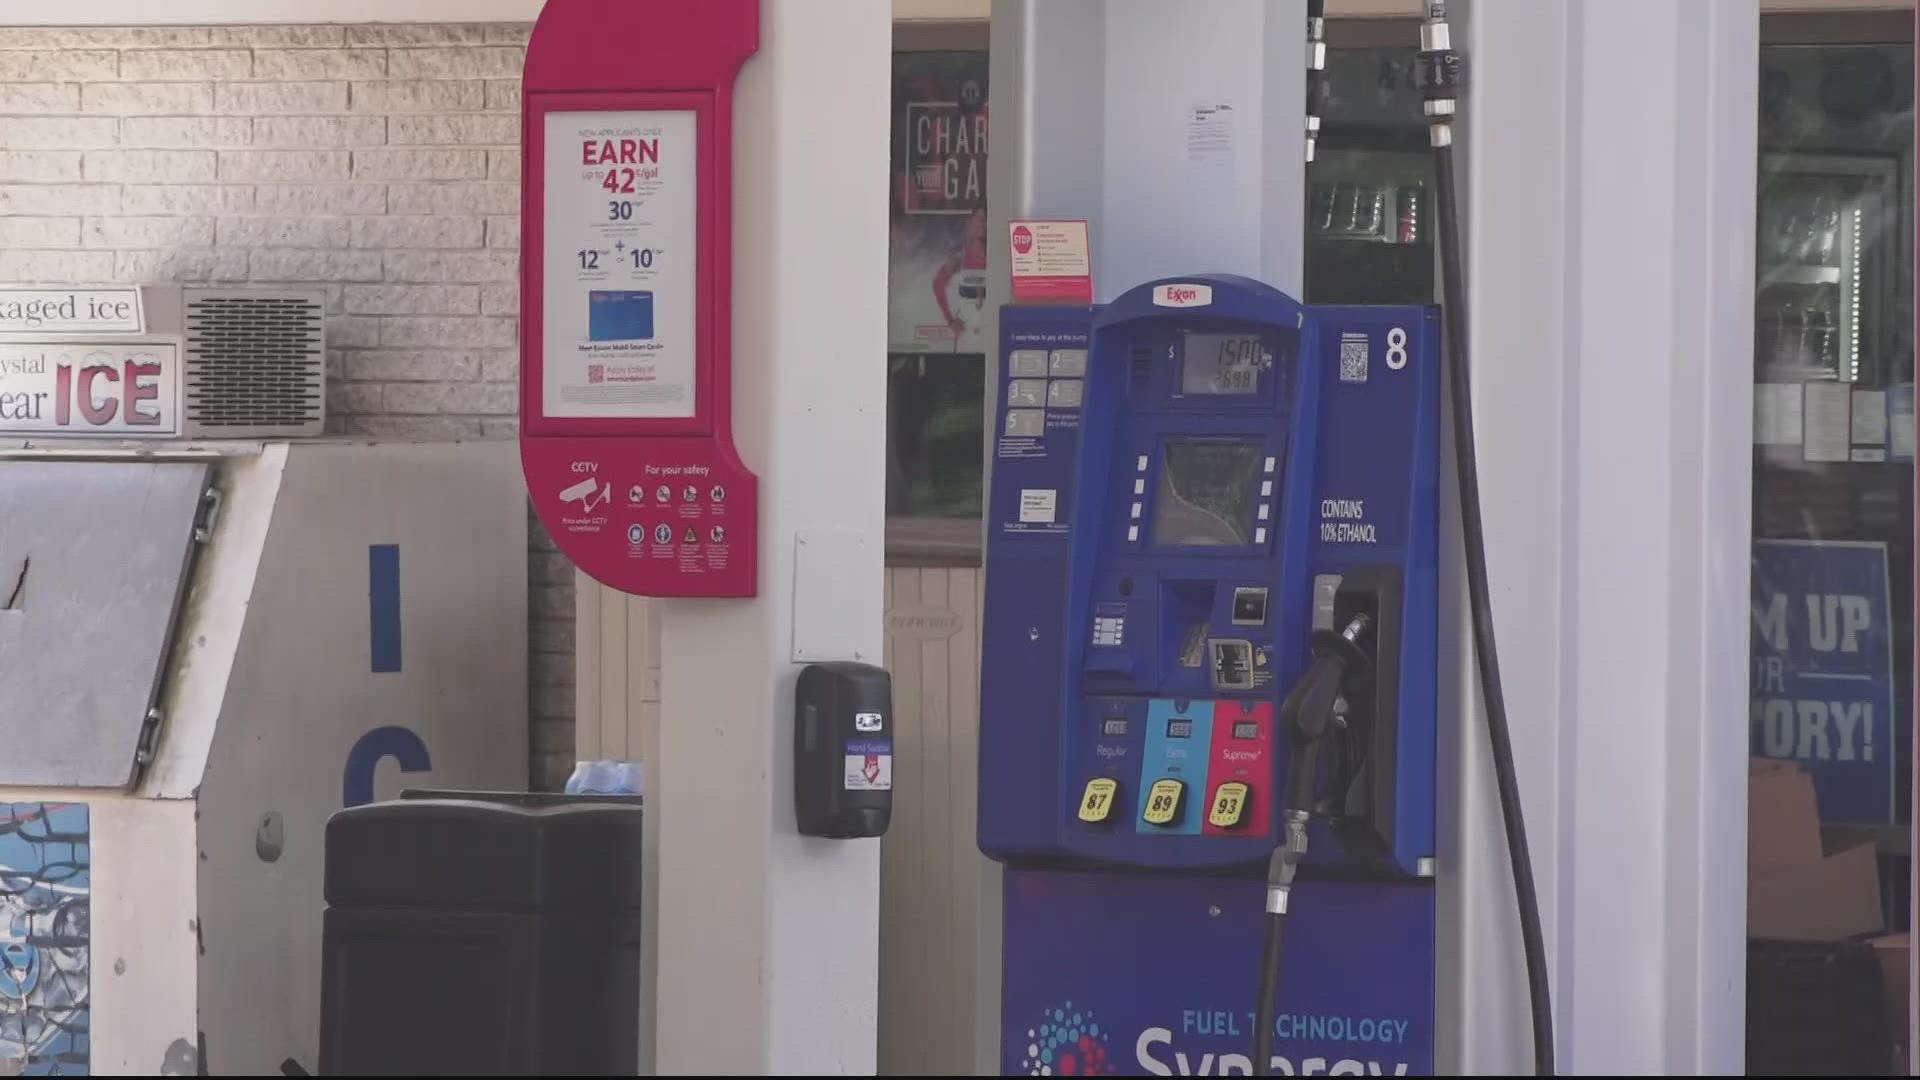 Maryland and Virginia drivers will pay more at the gas pump after an automatic tax increase that is set to take place before the July 4 weekend.